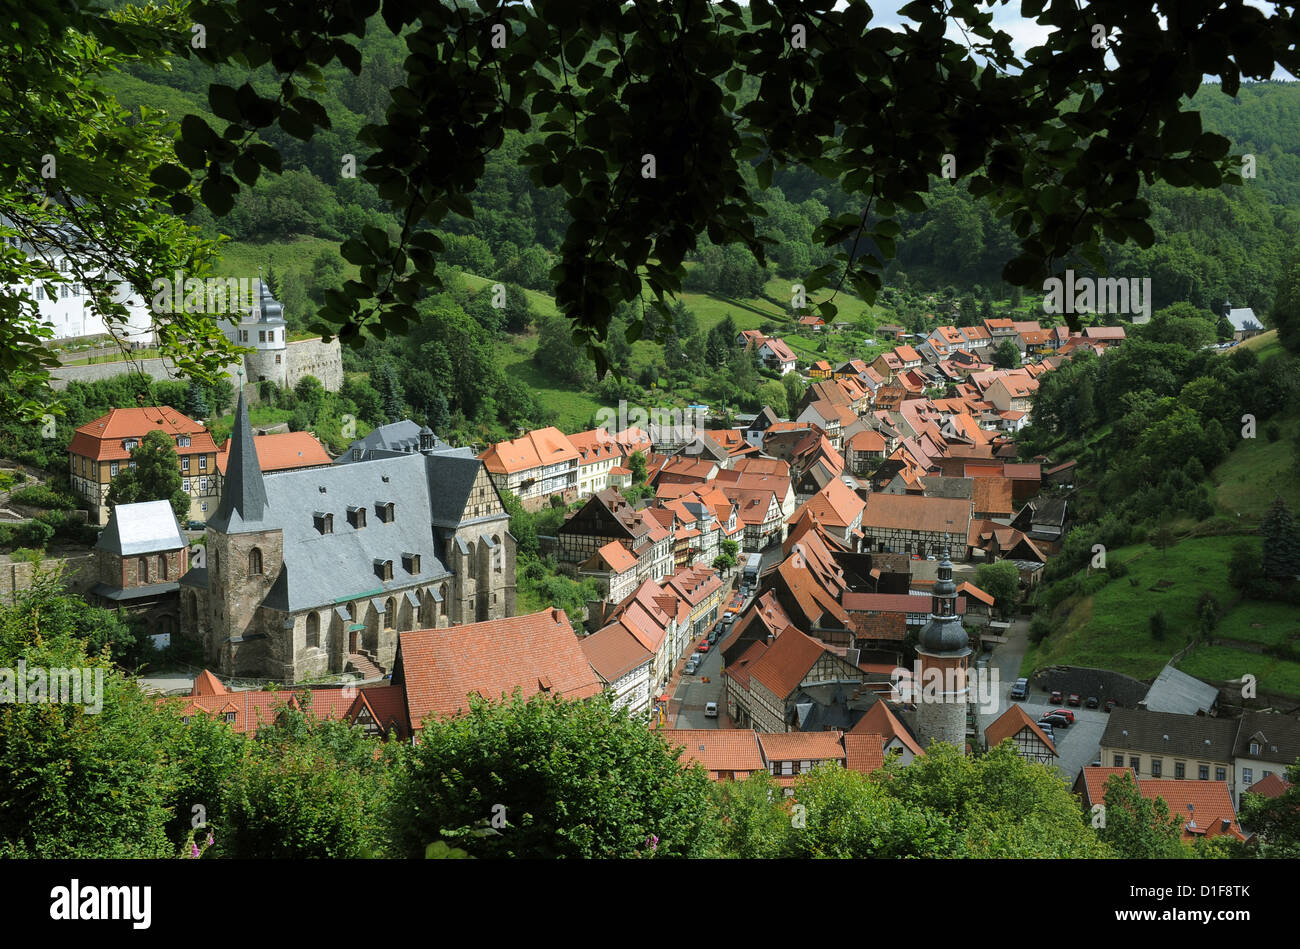 View of the city of Stolberg, Germany, 15 July 2012. Stolberg is situated in the southern part of the Harz mountains and best known for its historic city centre. Photo: Waltraud Grubitzsch Stock Photo